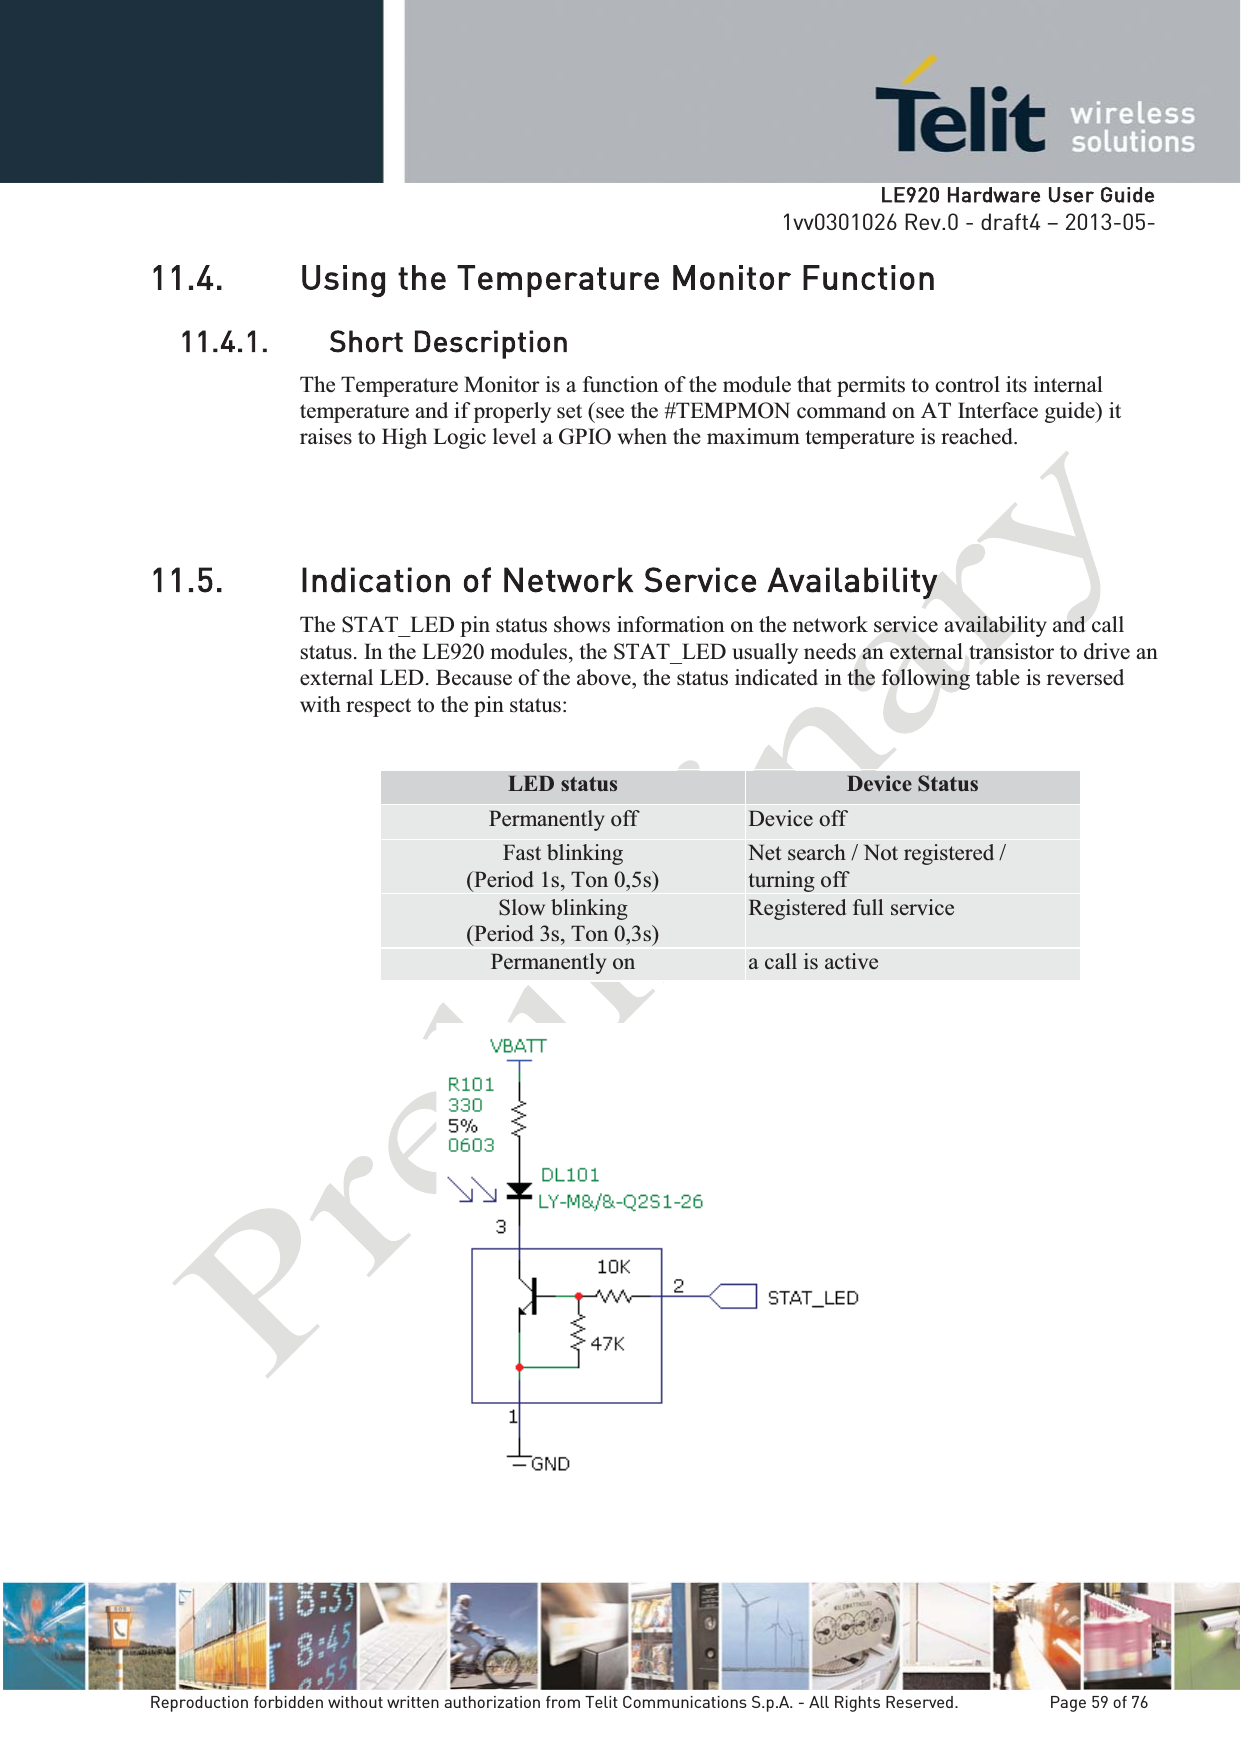   LLE920 Hardware User Guide1vv0301026 Rev.0 - draft4 – 2013-05-Reproduction forbidden without written authorization from Telit Communications S.p.A. - All Rights Reserved.    Page 59 of 76 11.4. Using the Temperature Monitor Function11.4.1. Short Description The Temperature Monitor is a function of the module that permits to control its internal temperature and if properly set (see the #TEMPMON command on AT Interface guide) it raises to High Logic level a GPIO when the maximum temperature is reached.11.5. Indication of Network Service Availability The STAT_LED pin status shows information on the network service availability and call status. In the LE920 modules, the STAT_LED usually needs an external transistor to drive an external LED. Because of the above, the status indicated in the following table is reversed with respect to the pin status:  LED status  Device Status Permanently off  Device off Fast blinking (Period 1s, Ton 0,5s) Net search / Not registered / turning off Slow blinking (Period 3s, Ton 0,3s) Registered full service Permanently on  a call is active  